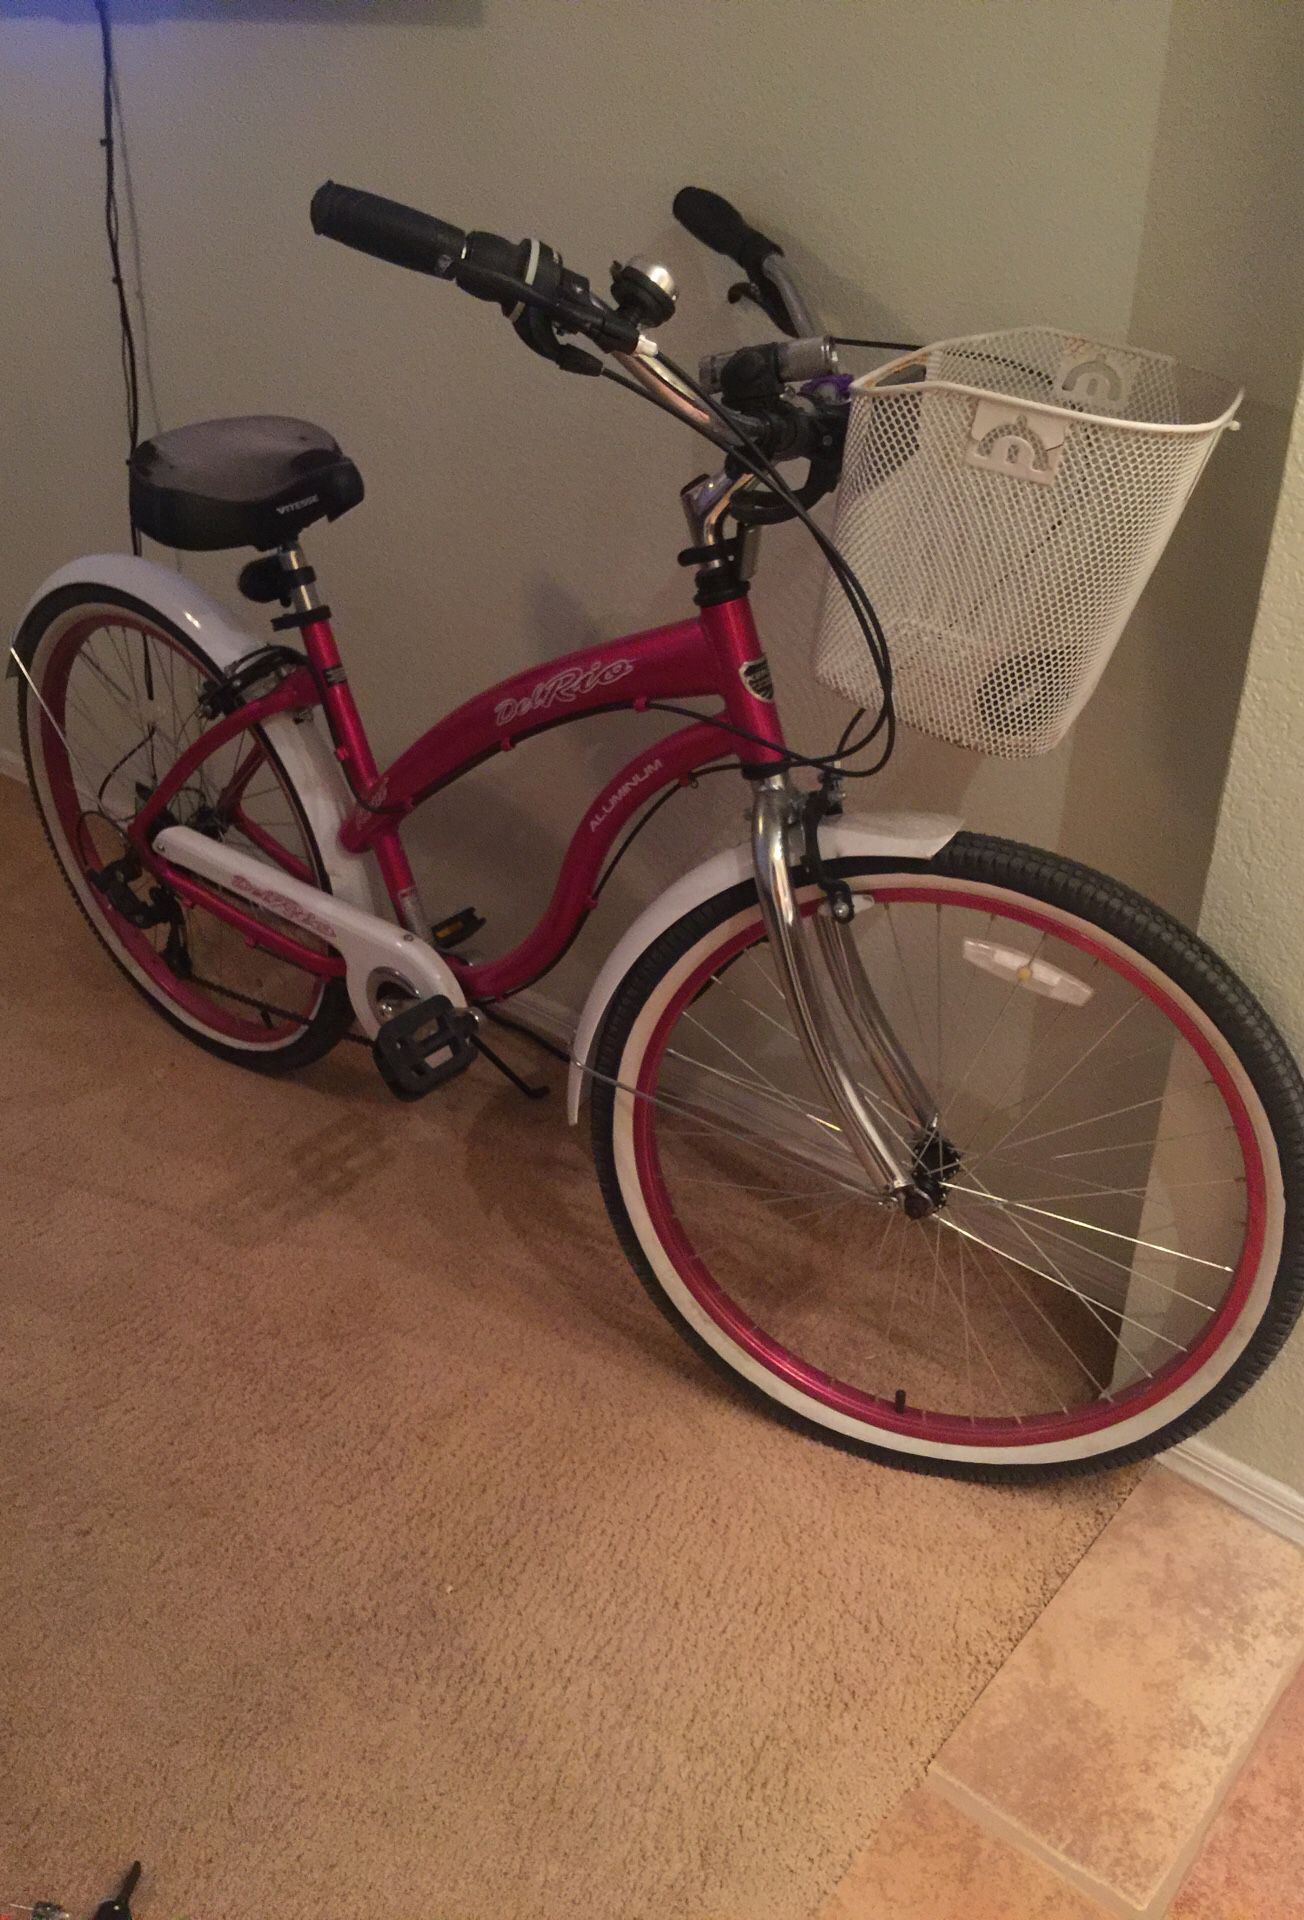 DelRio 26”Pink/White Bike w/tire pump & basket...seldom used over past 3 years